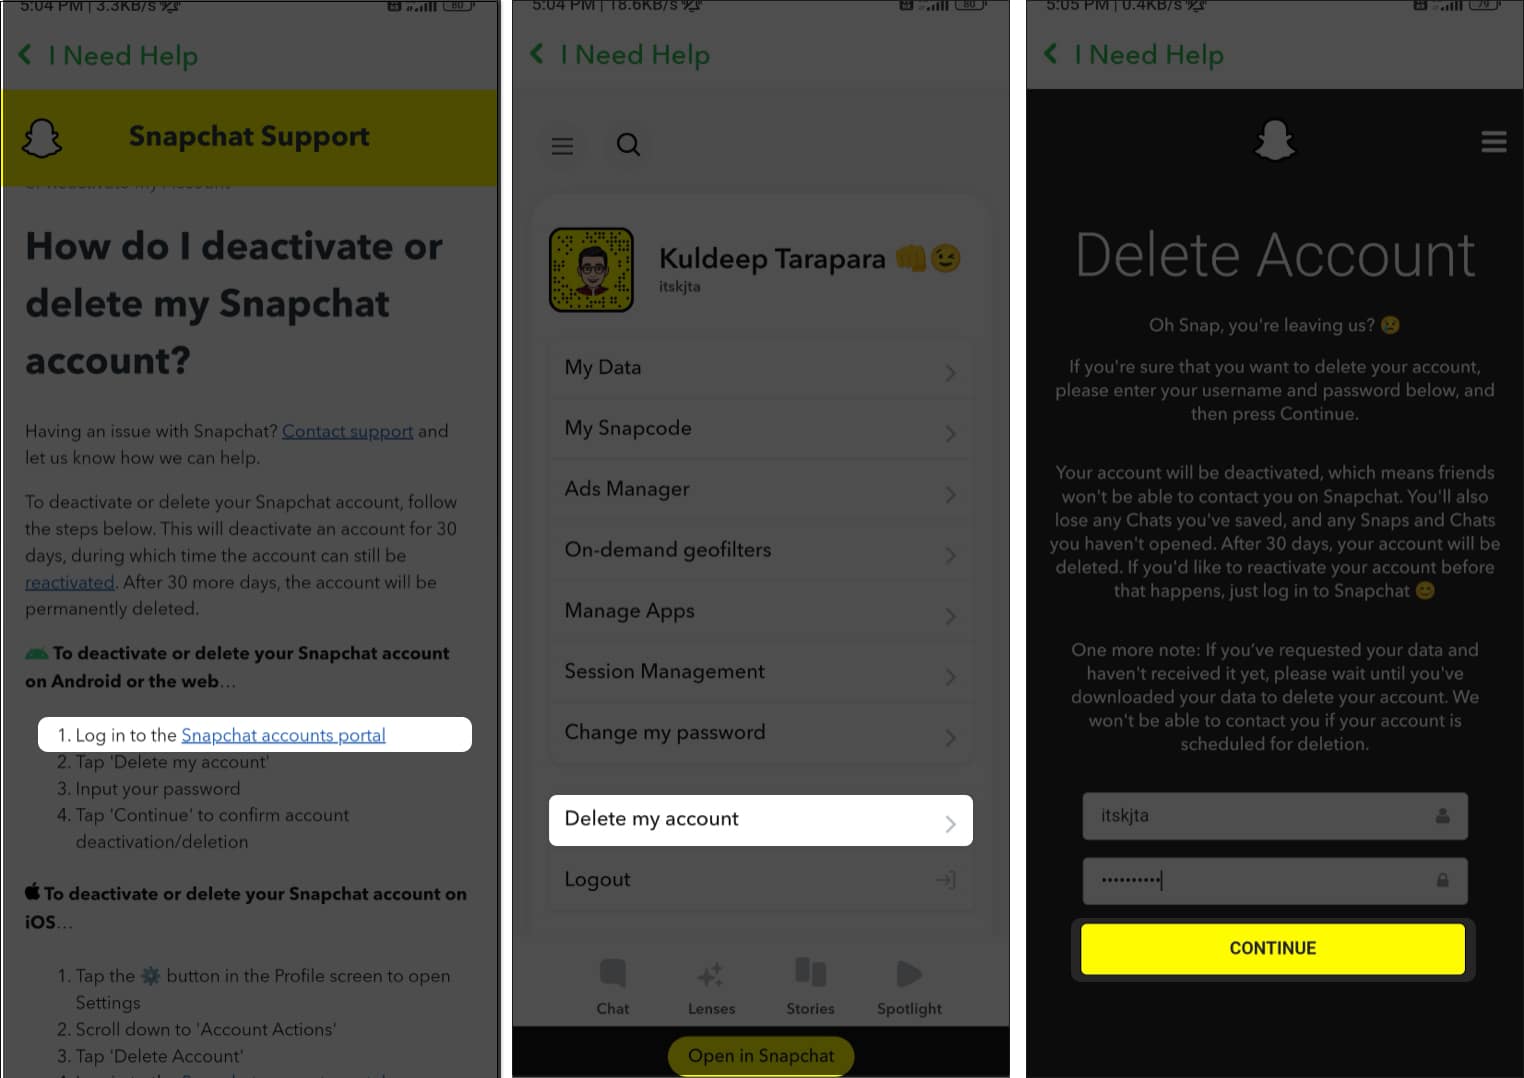 Click on Snapchat accounts portal link for Android, Tap Delete my account, and Hit CONTINUE